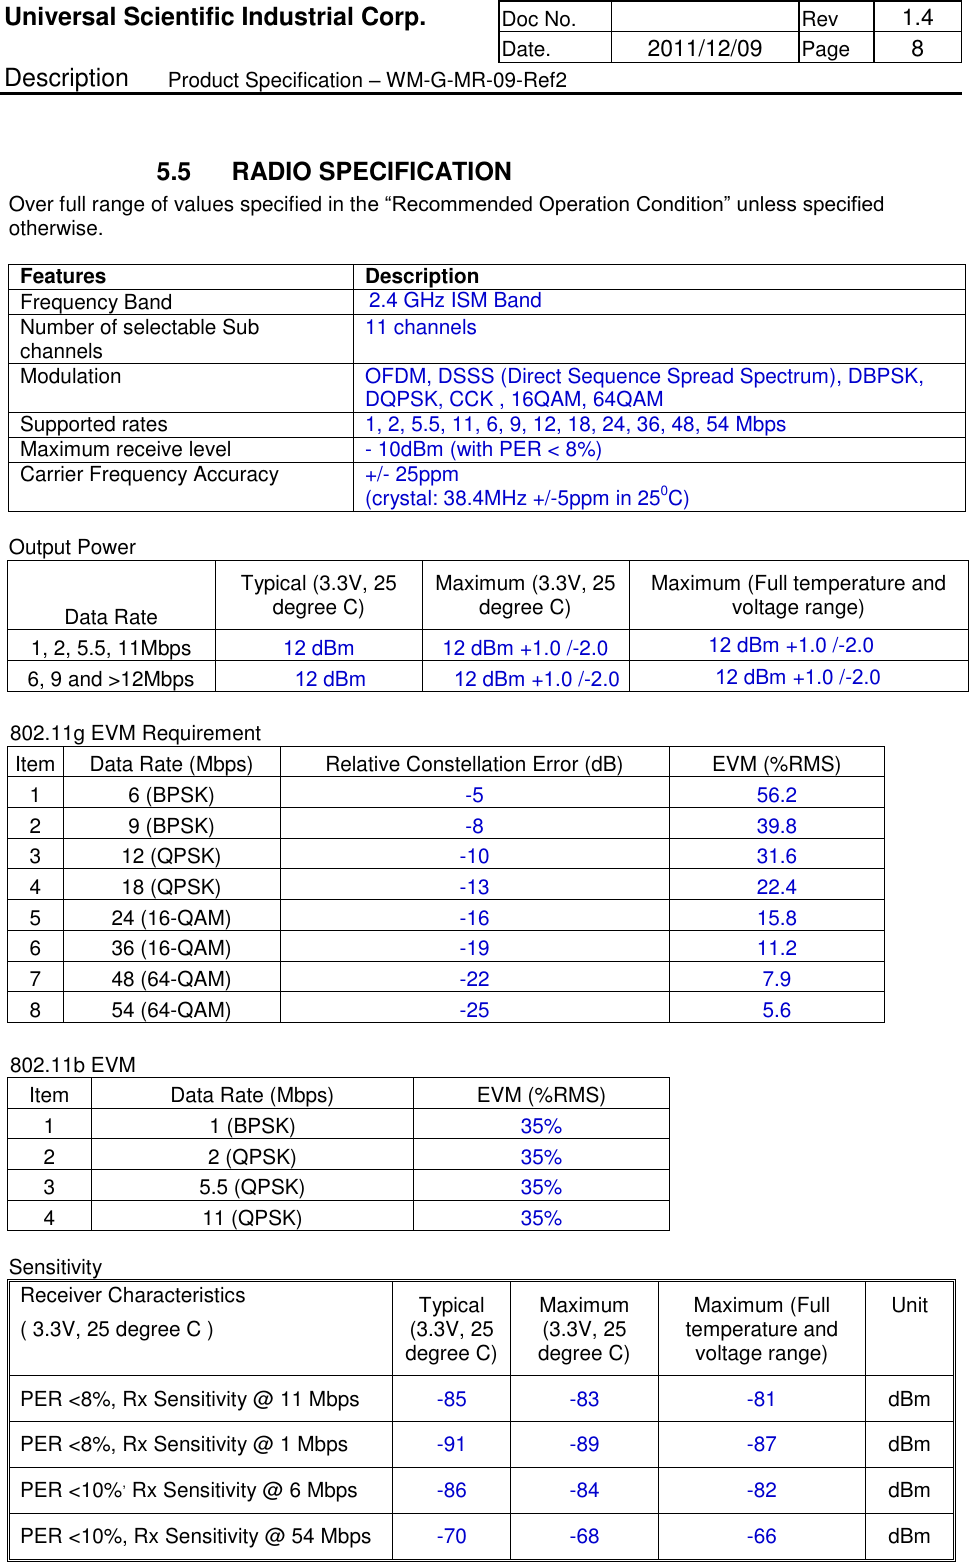 Universal Scientific Industrial Corp. Doc No.  Rev  1.4 Date.  2011/12/09 Page  8 Description  Product Specification – WM-G-MR-09-Ref2 5.5  RADIO SPECIFICATION Over full range of values specified in the “Recommended Operation Condition” unless specified otherwise. Features  Description Frequency Band  2.4 GHz ISM BandNumber of selectable Sub channels  11 channels Modulation  OFDM, DSSS (Direct Sequence Spread Spectrum), DBPSK, DQPSK, CCK , 16QAM, 64QAM Supported rates  1, 2, 5.5, 11, 6, 9, 12, 18, 24, 36, 48, 54 Mbps Maximum receive level  - 10dBm (with PER &lt; 8%) Carrier Frequency Accuracy  +/- 25ppm (crystal: 38.4MHz +/-5ppm in 250C)Output Power Data Rate Typical (3.3V, 25 degree C)  Maximum (3.3V, 25 degree C)  Maximum (Full temperature and voltage range) 1, 2, 5.5, 11Mbps  12 dBm 12 dBm +1.0 /-2.0 6, 9 and &gt;12Mbps  12 dBm 12 dBm +1.0 /-2.0 802.11g EVM Requirement Item  Data Rate (Mbps)  Relative Constellation Error (dB)  EVM (%RMS) 1  6 (BPSK)  -5  56.2 2  9 (BPSK)  -8  39.8 3  12 (QPSK)  -10  31.6 4  18 (QPSK)  -13  22.4 5  24 (16-QAM)  -16  15.8 6  36 (16-QAM)  -19  11.2 7  48 (64-QAM)  -22  7.9 8  54 (64-QAM)  -25  5.6 802.11b EVM Item  Data Rate (Mbps)  EVM (%RMS) 1  1 (BPSK)  35% 2  2 (QPSK)  35% 3  5.5 (QPSK)  35% 4  11 (QPSK)  35% Sensitivity Receiver Characteristics ( 3.3V, 25 degree C )  Typical (3.3V, 25 degree C) Maximum (3.3V, 25 degree C) Maximum (Full temperature and voltage range) Unit PER &lt;8%, Rx Sensitivity @ 11 Mbps -85  -83  -81  dBm PER &lt;8%, Rx Sensitivity @ 1 Mbps  -91  -89  -87  dBm PER &lt;10%, Rx Sensitivity @ 6 Mbps -86  -84  -82  dBm PER &lt;10%, Rx Sensitivity @ 54 Mbps  -70  -68  -66  dBm 12 dBm +1.0 /-2.0 12 dBm +1.0 /-2.0 